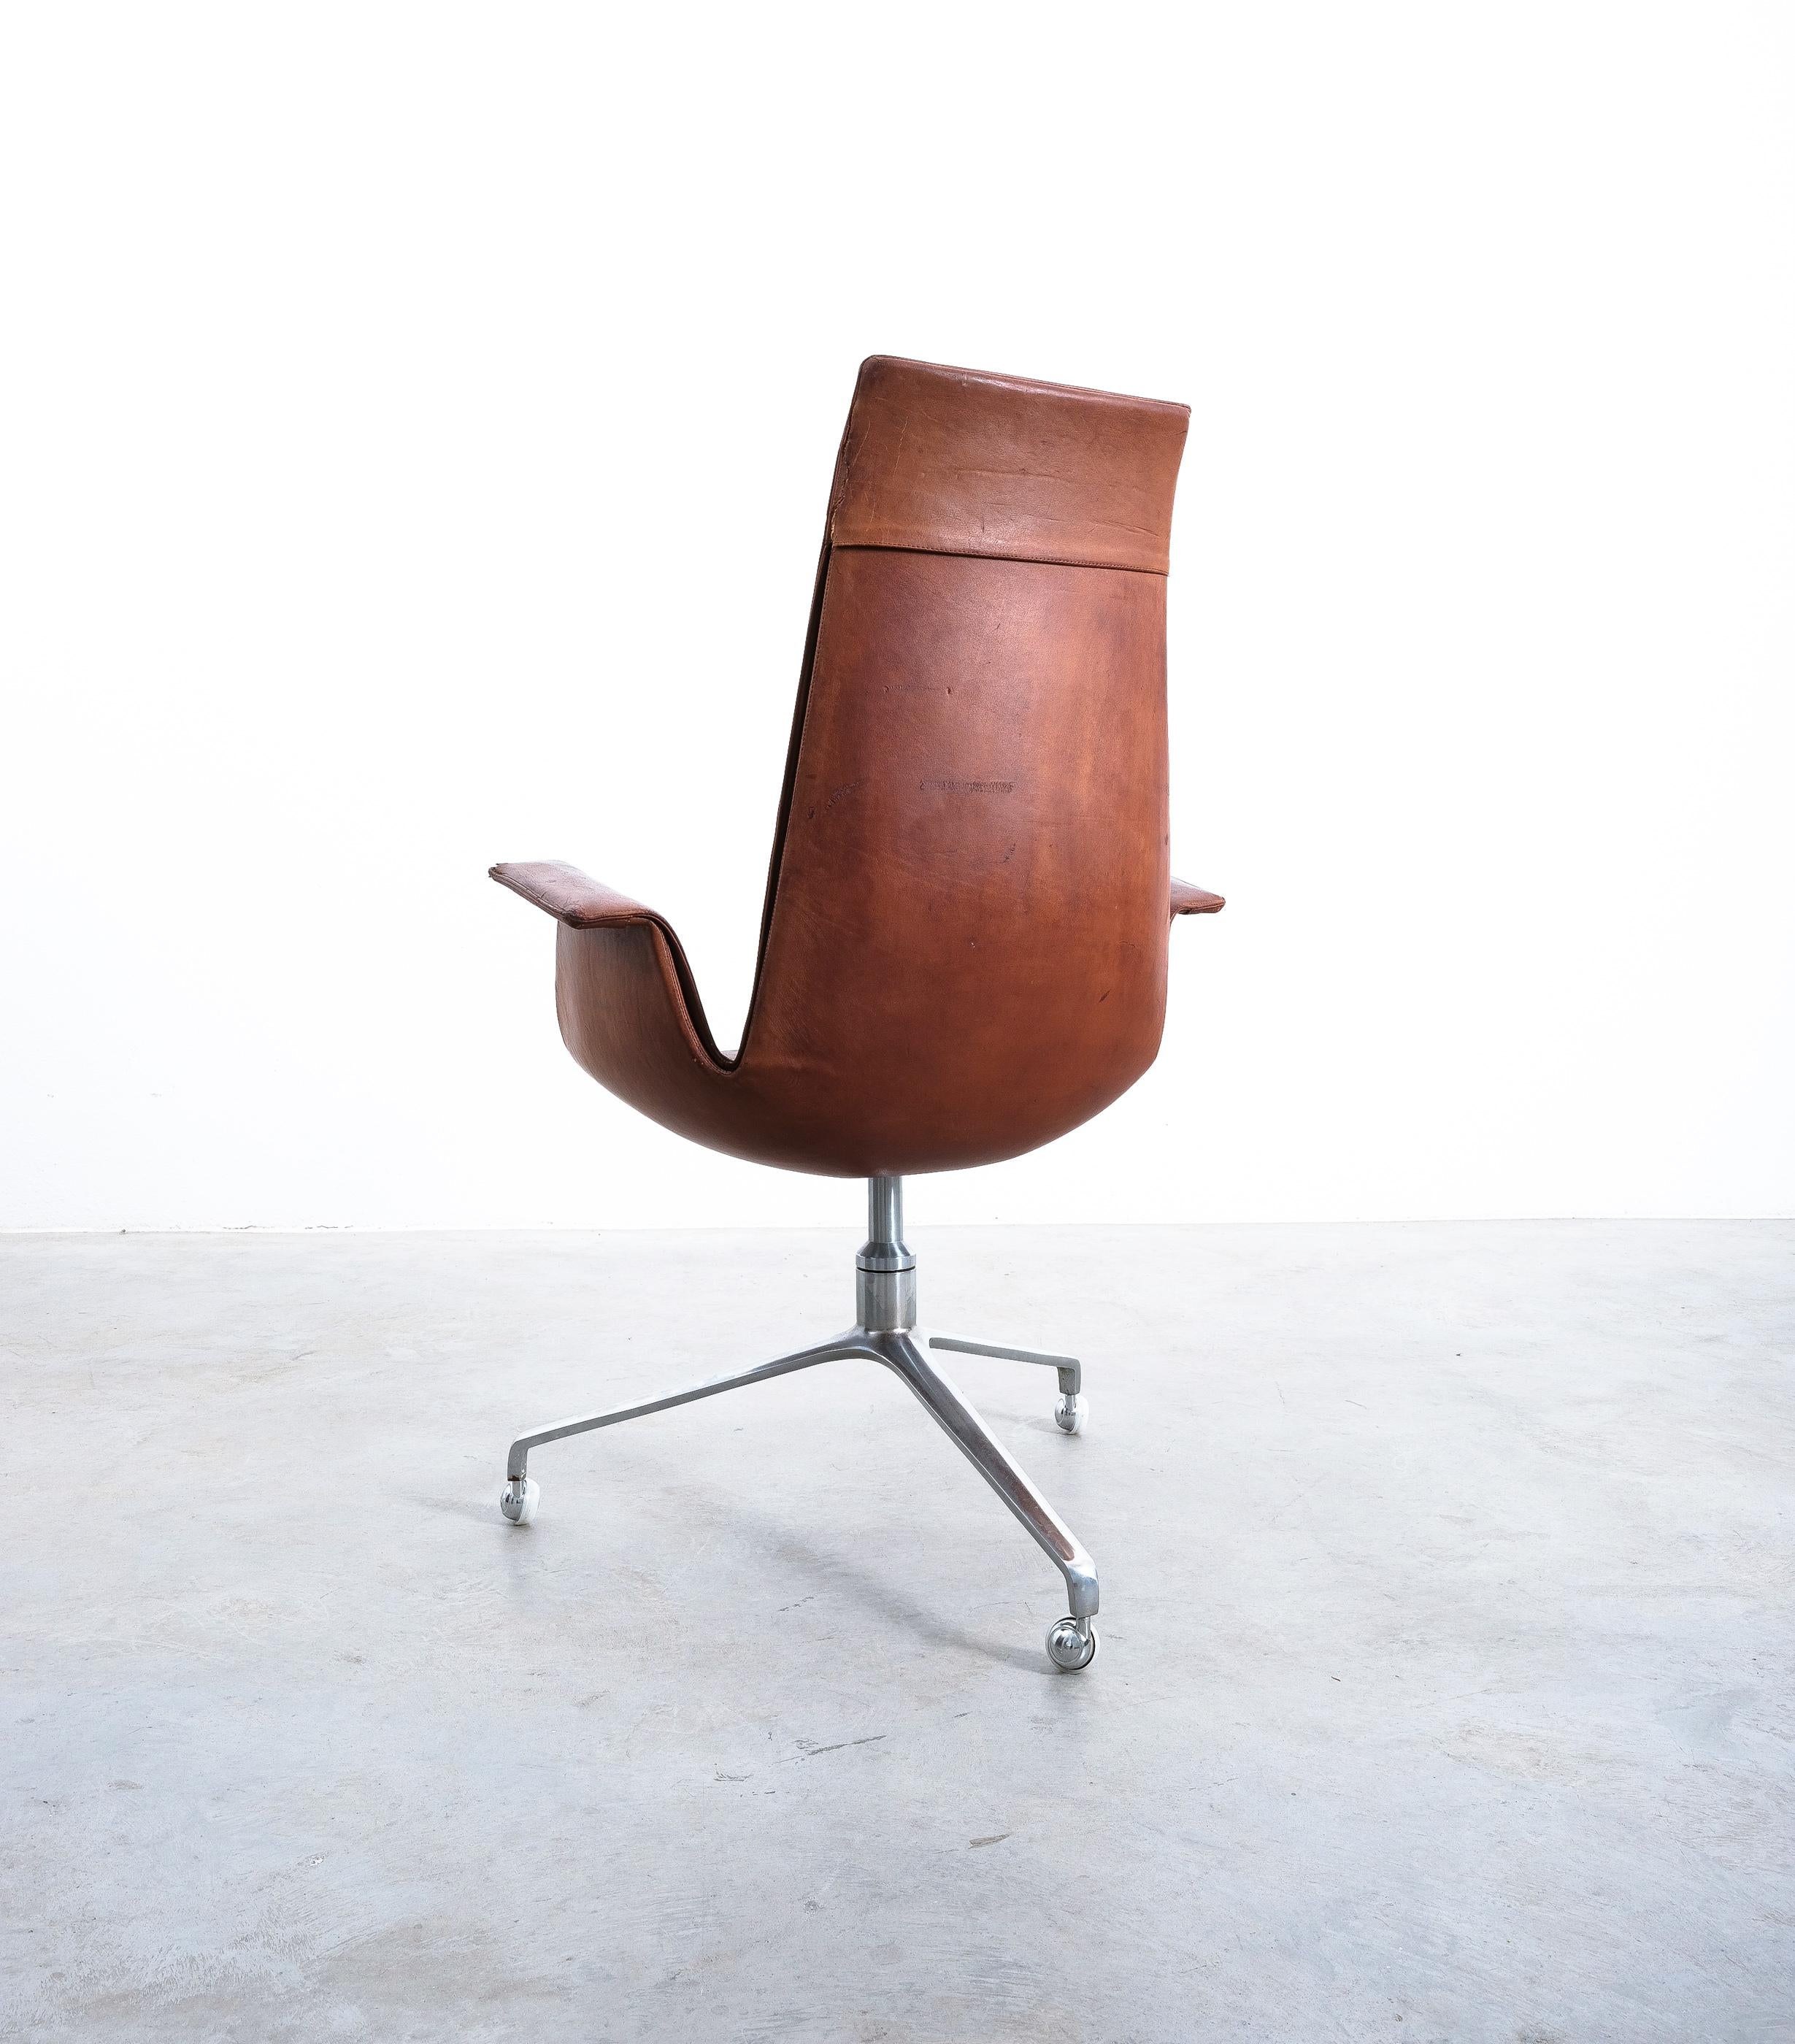 Danish FK 6725 Fabricius and Kastholm Brown Leather High Back Bird Desk Chair, 1964